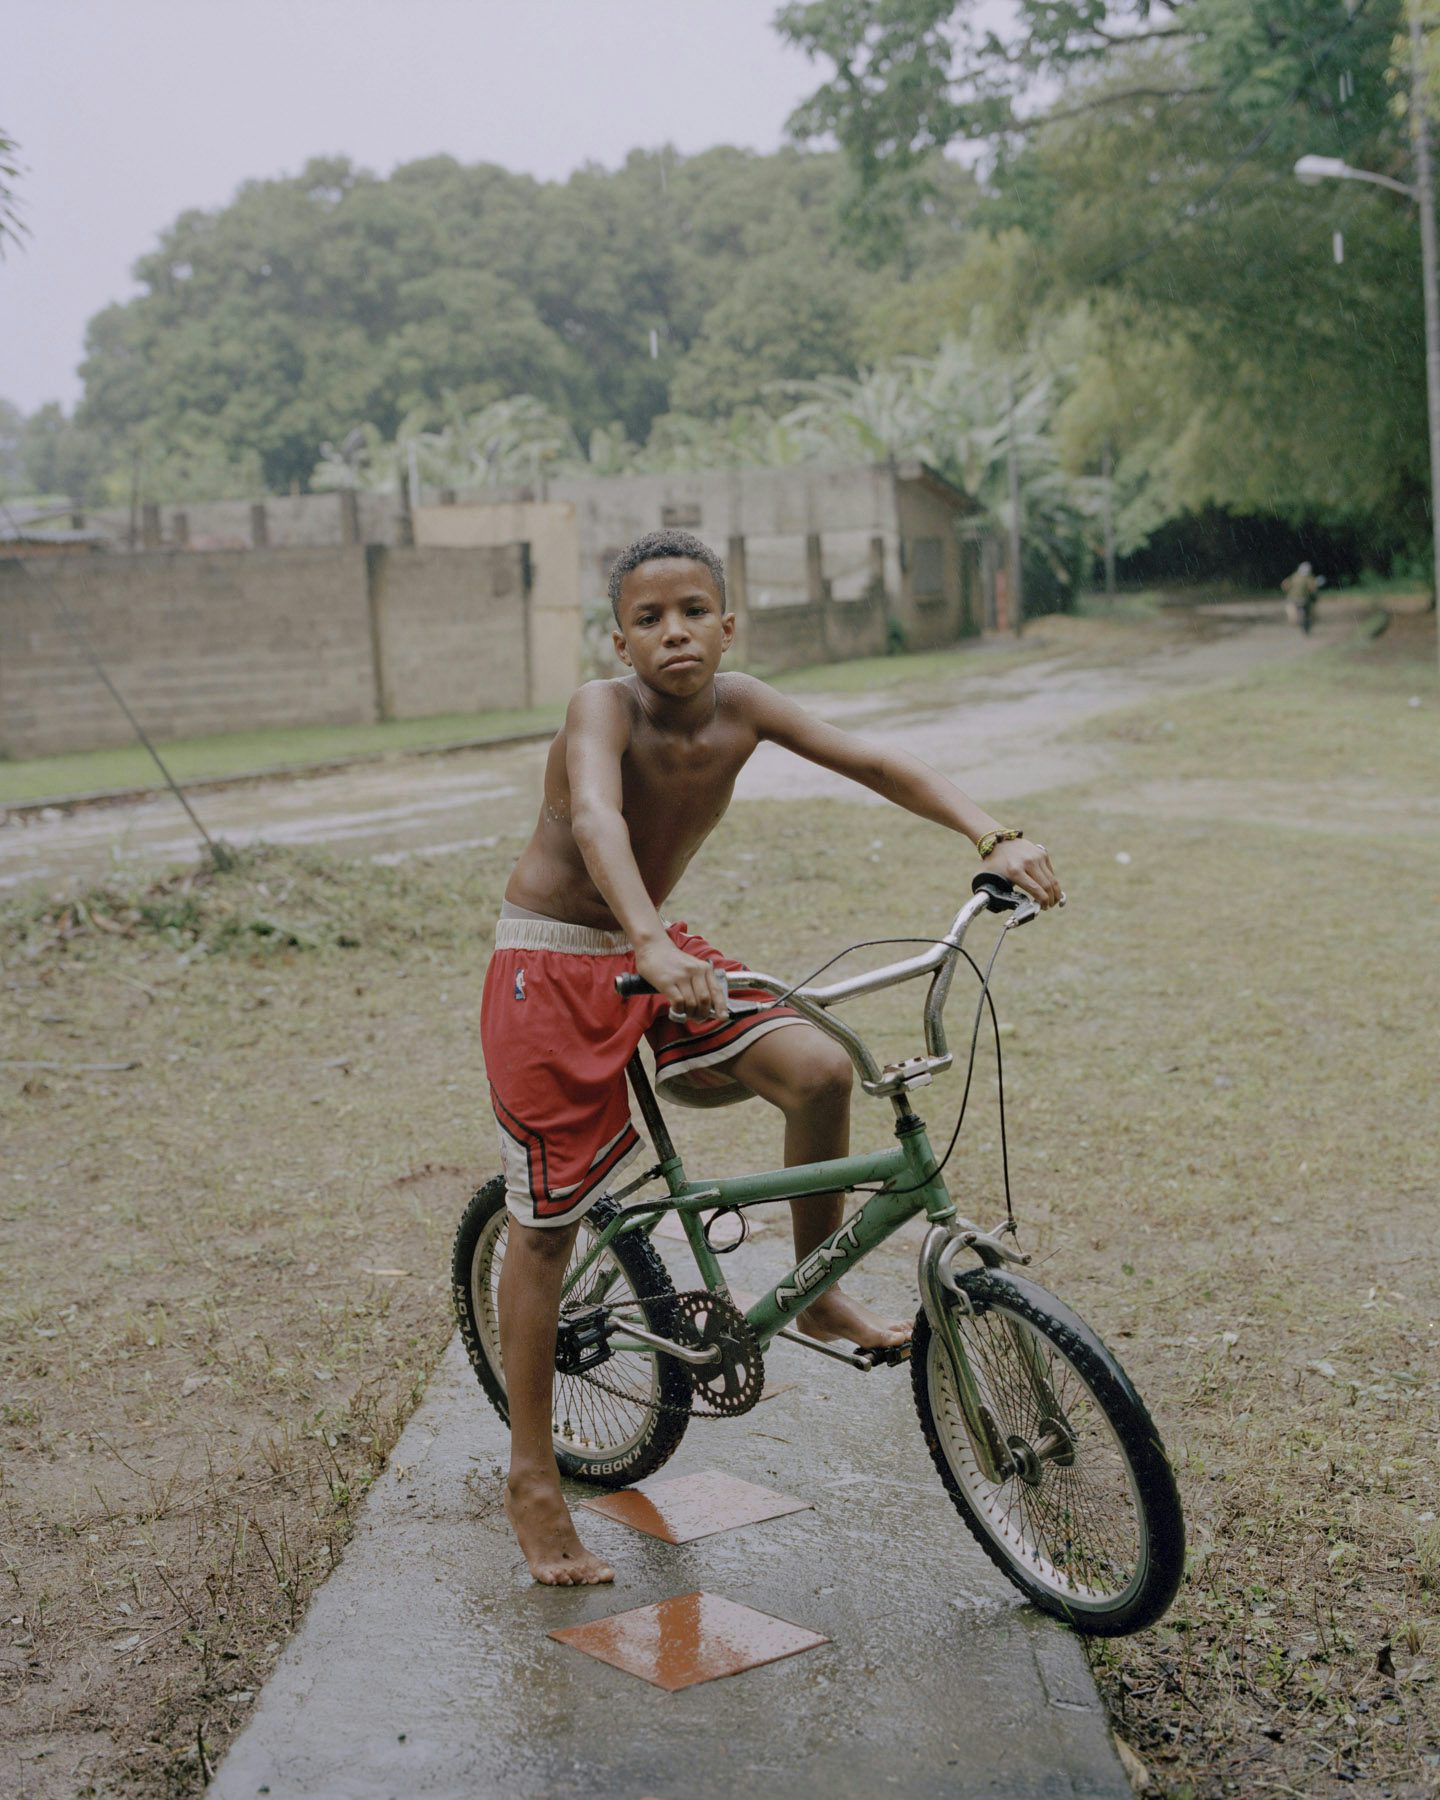 Image by Silvana Trevale of a young boy on a bicycle stopping on a wet trail